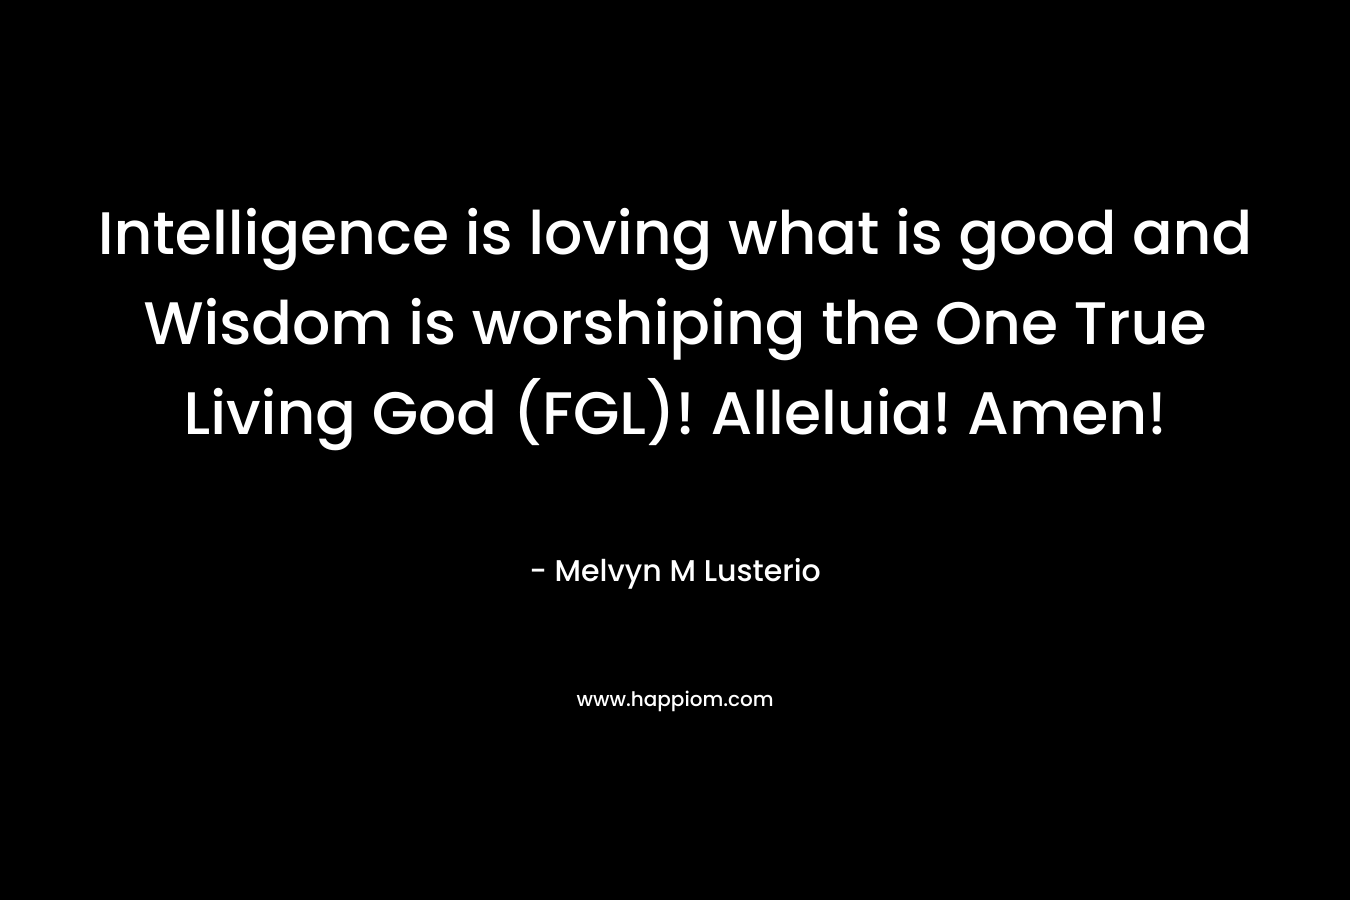 Intelligence is loving what is good and Wisdom is worshiping the One True Living God (FGL)! Alleluia! Amen!